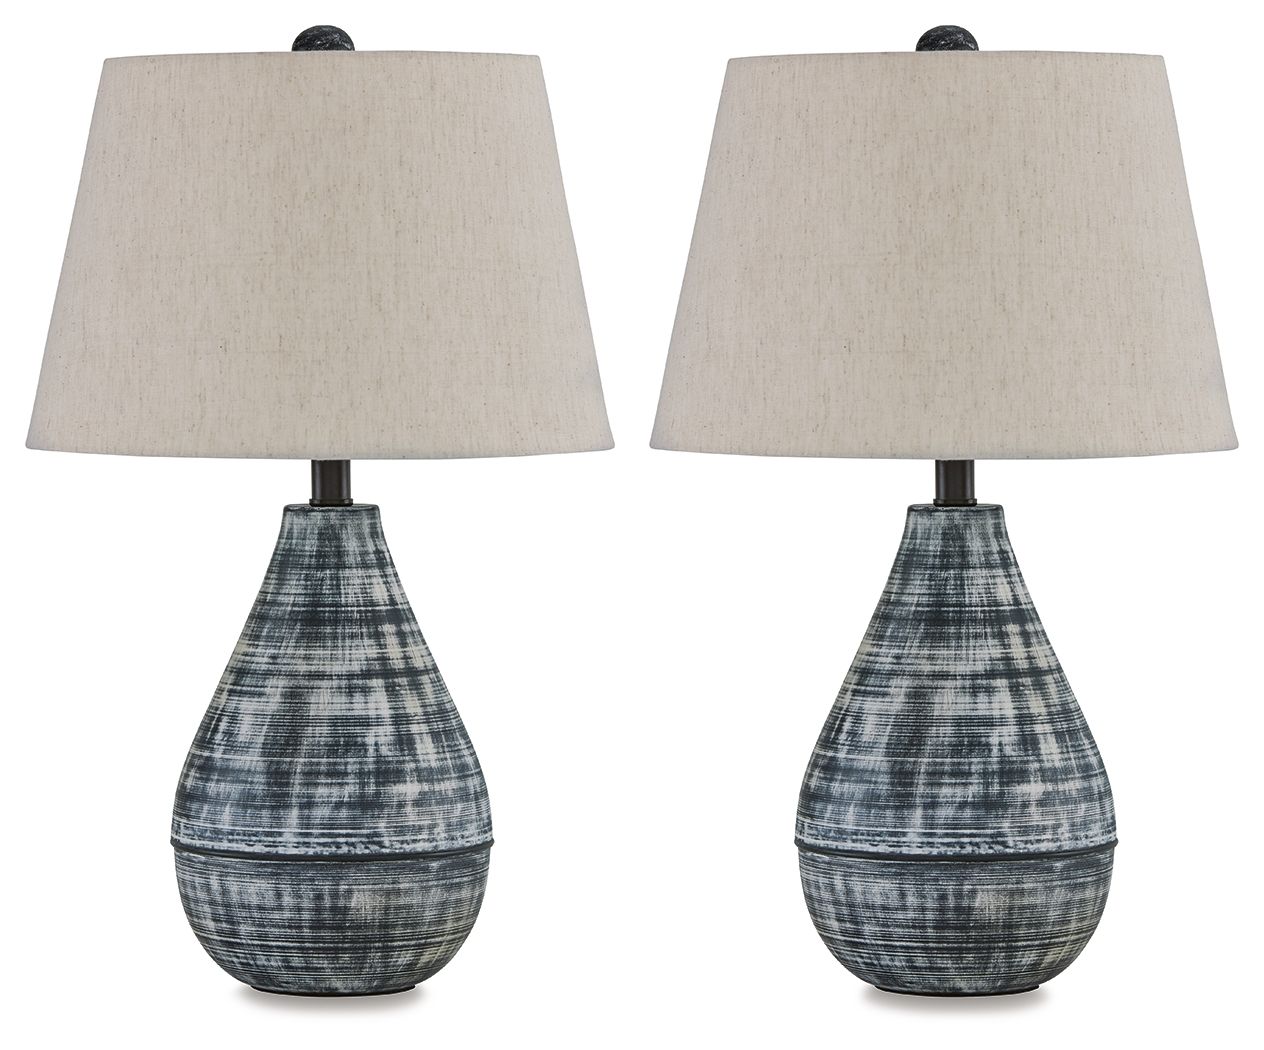 Erivell Taupe / Black - Metal Table Lamp (Set of 2)